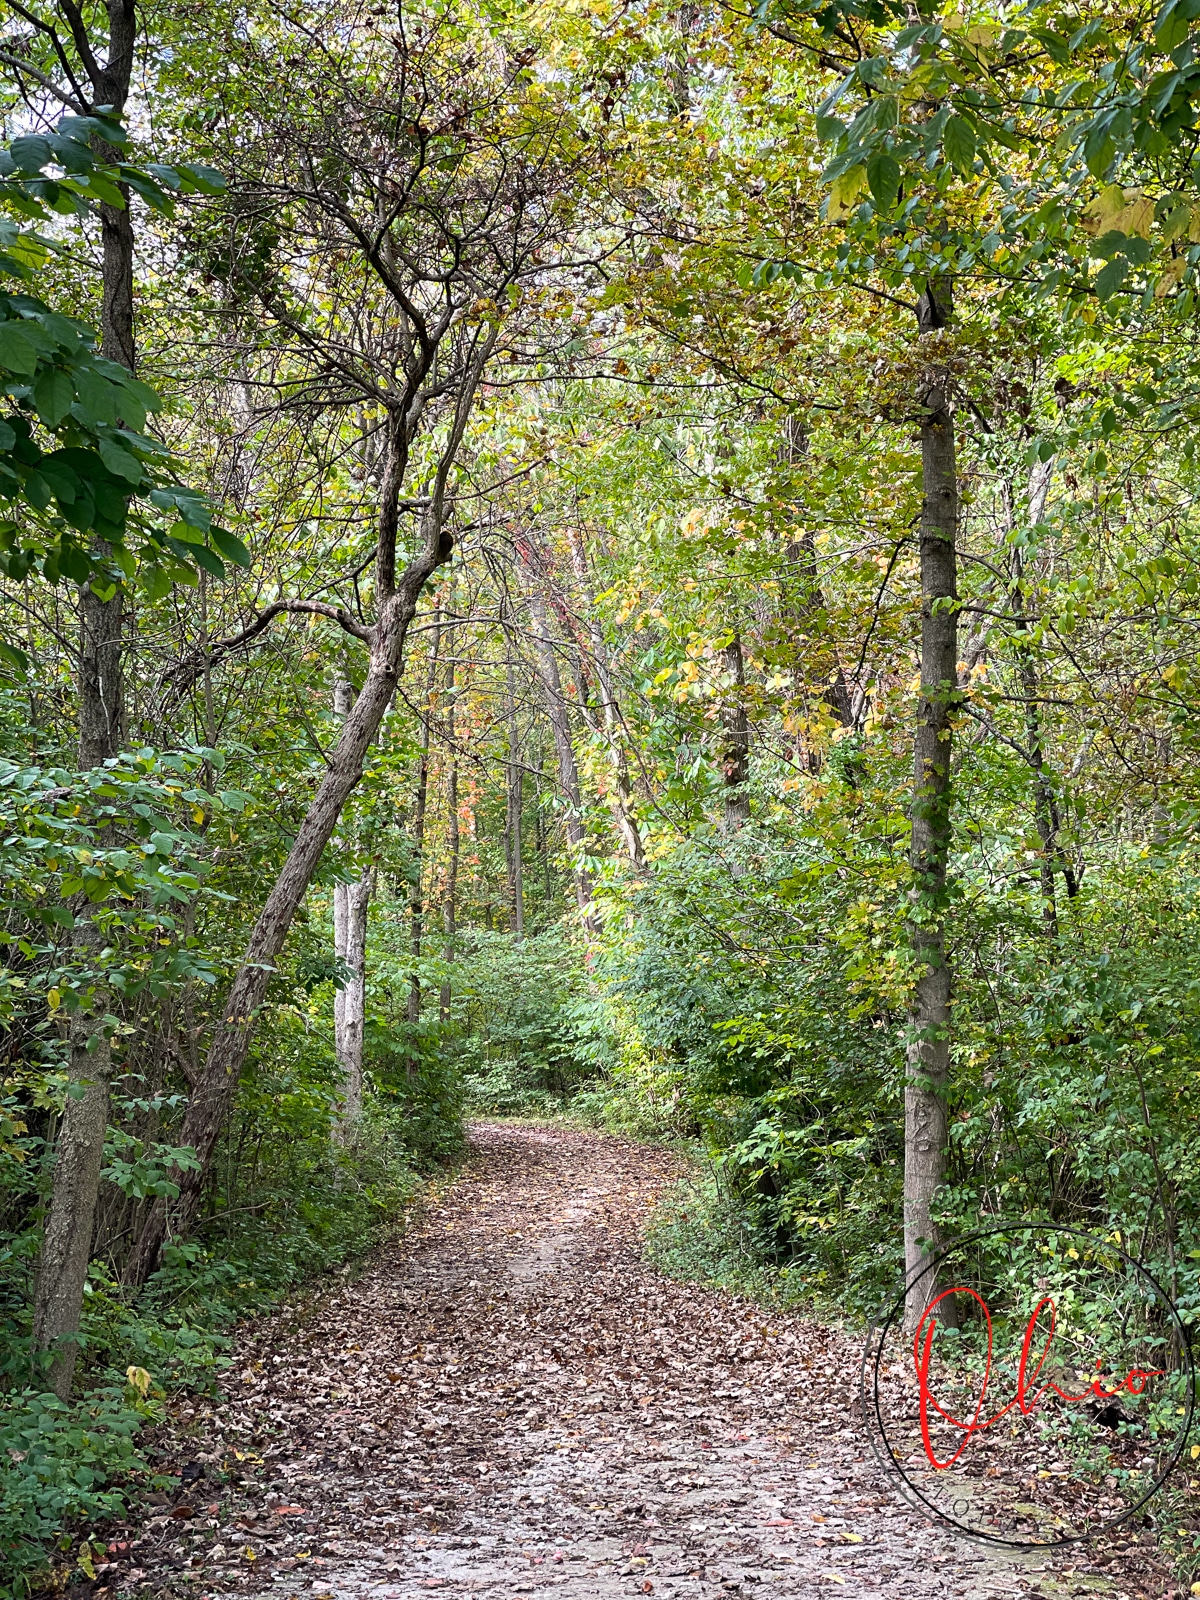 dirt path covered with dead fallen leaves, wooden tree leaves starting to change color and brown tree trunks.